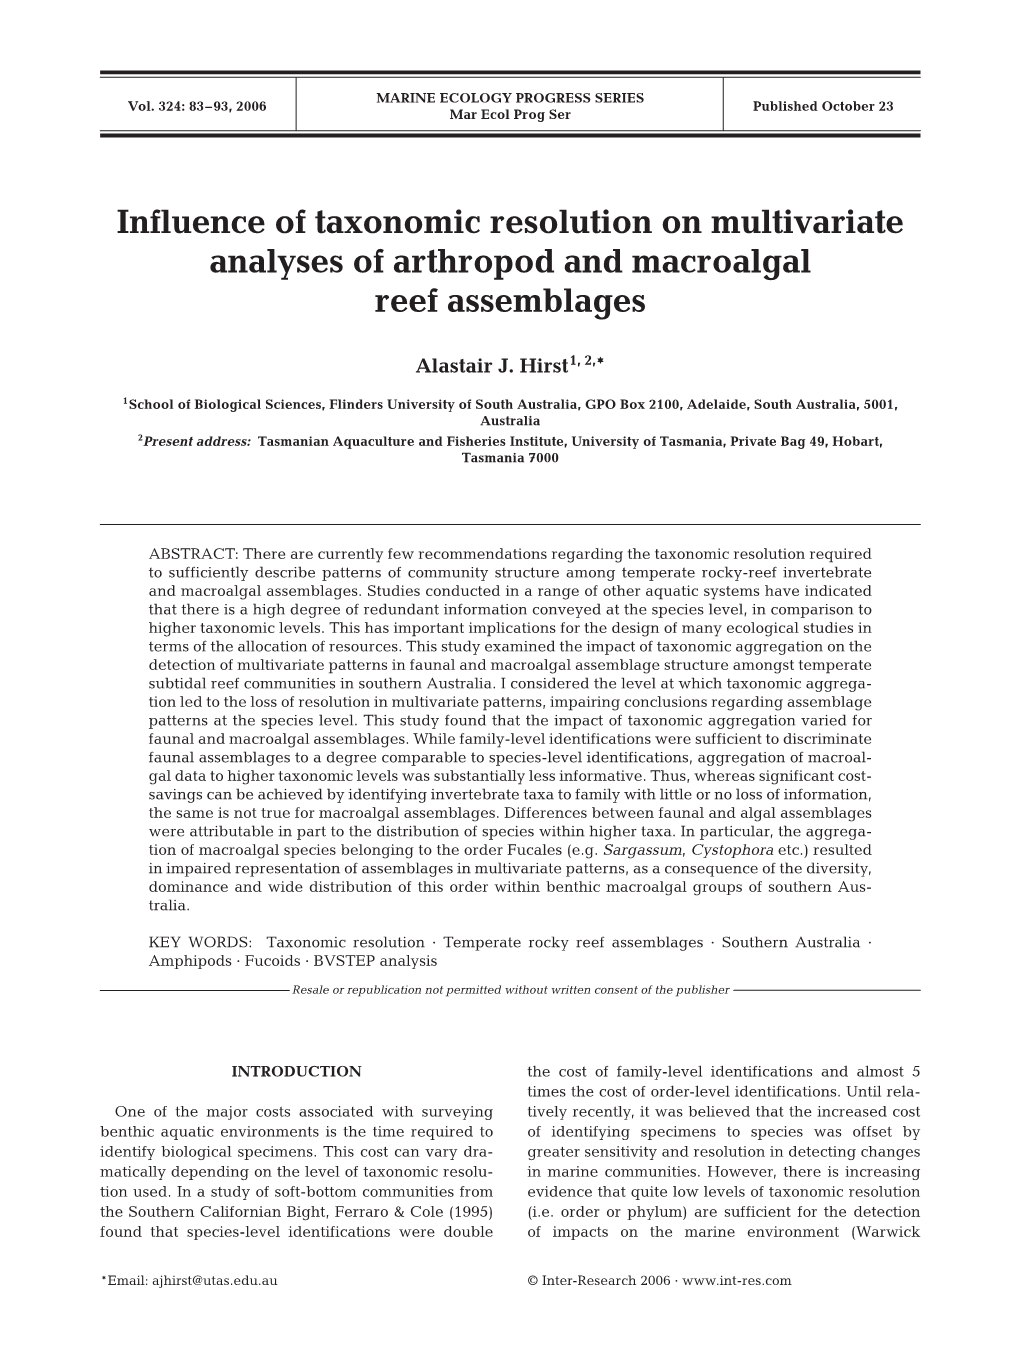 Influence of Taxonomic Resolution on Multivariate Analyses of Arthropod and Macroalgal Reef Assemblages